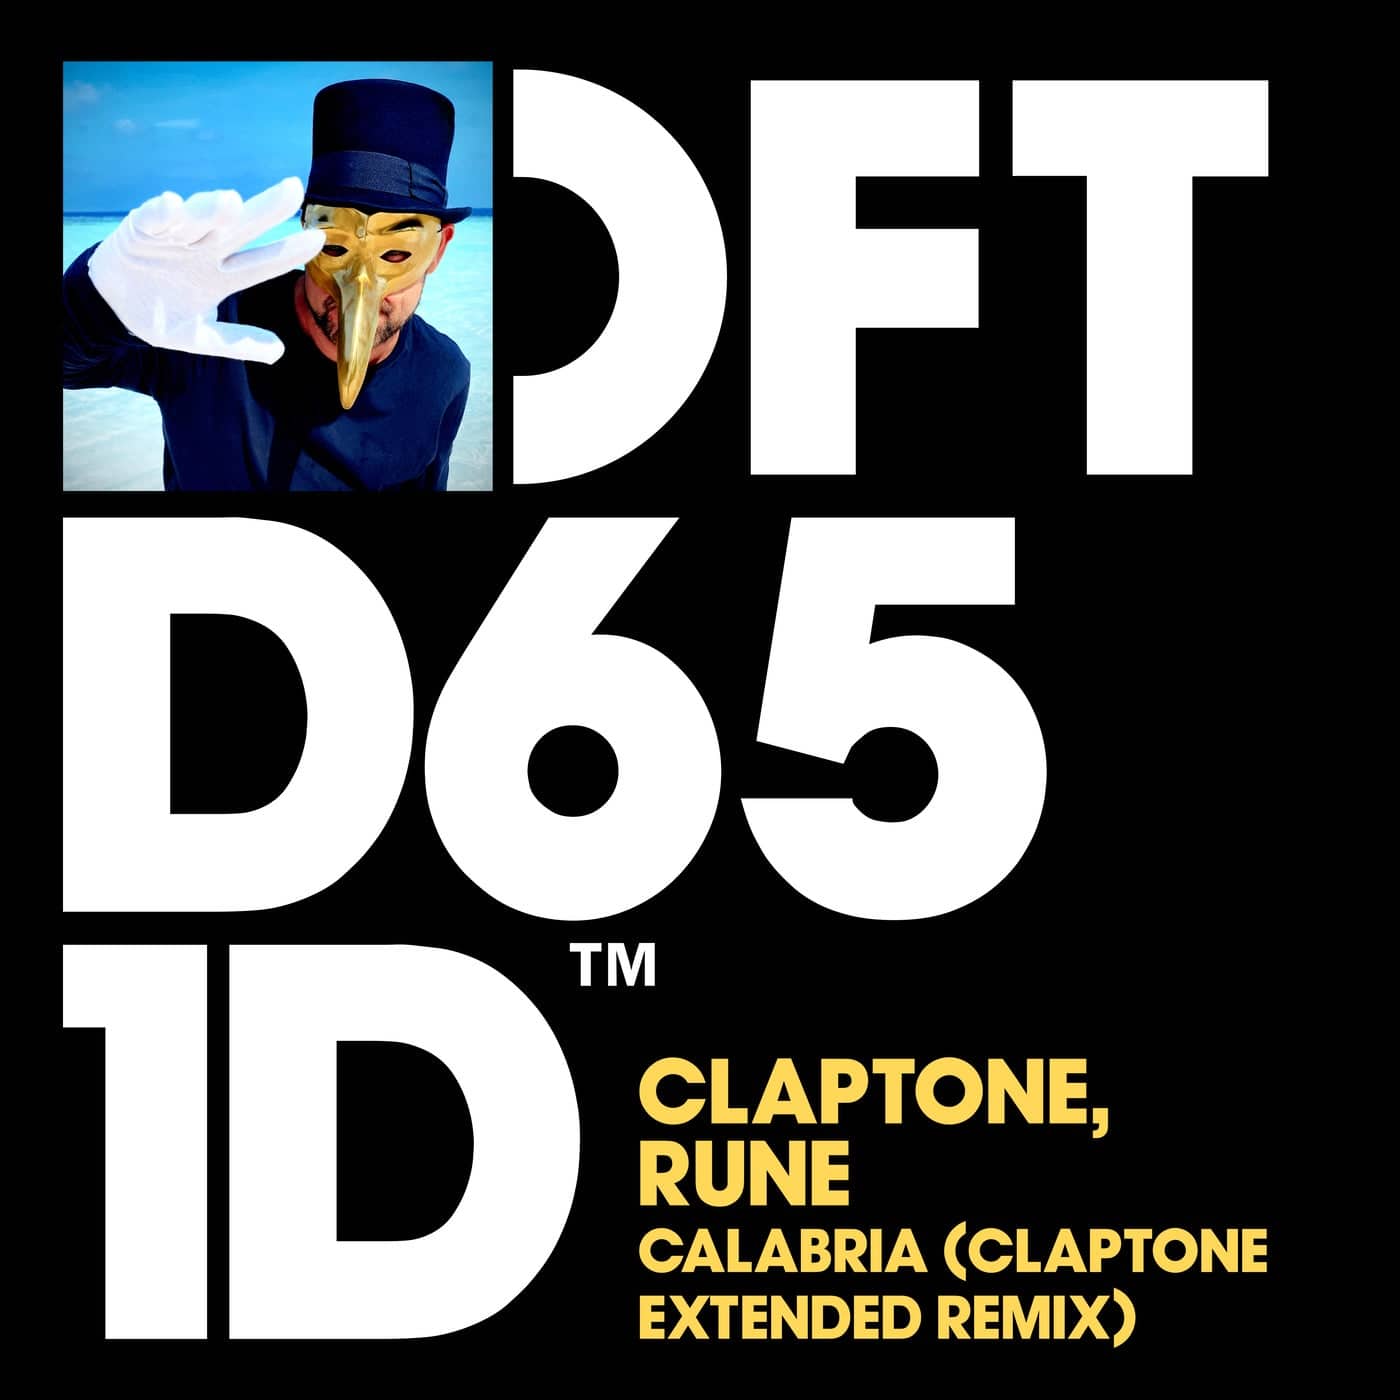 image cover: Rune, Claptone - Calabria - Claptone Extended Remix / DFTD651D3